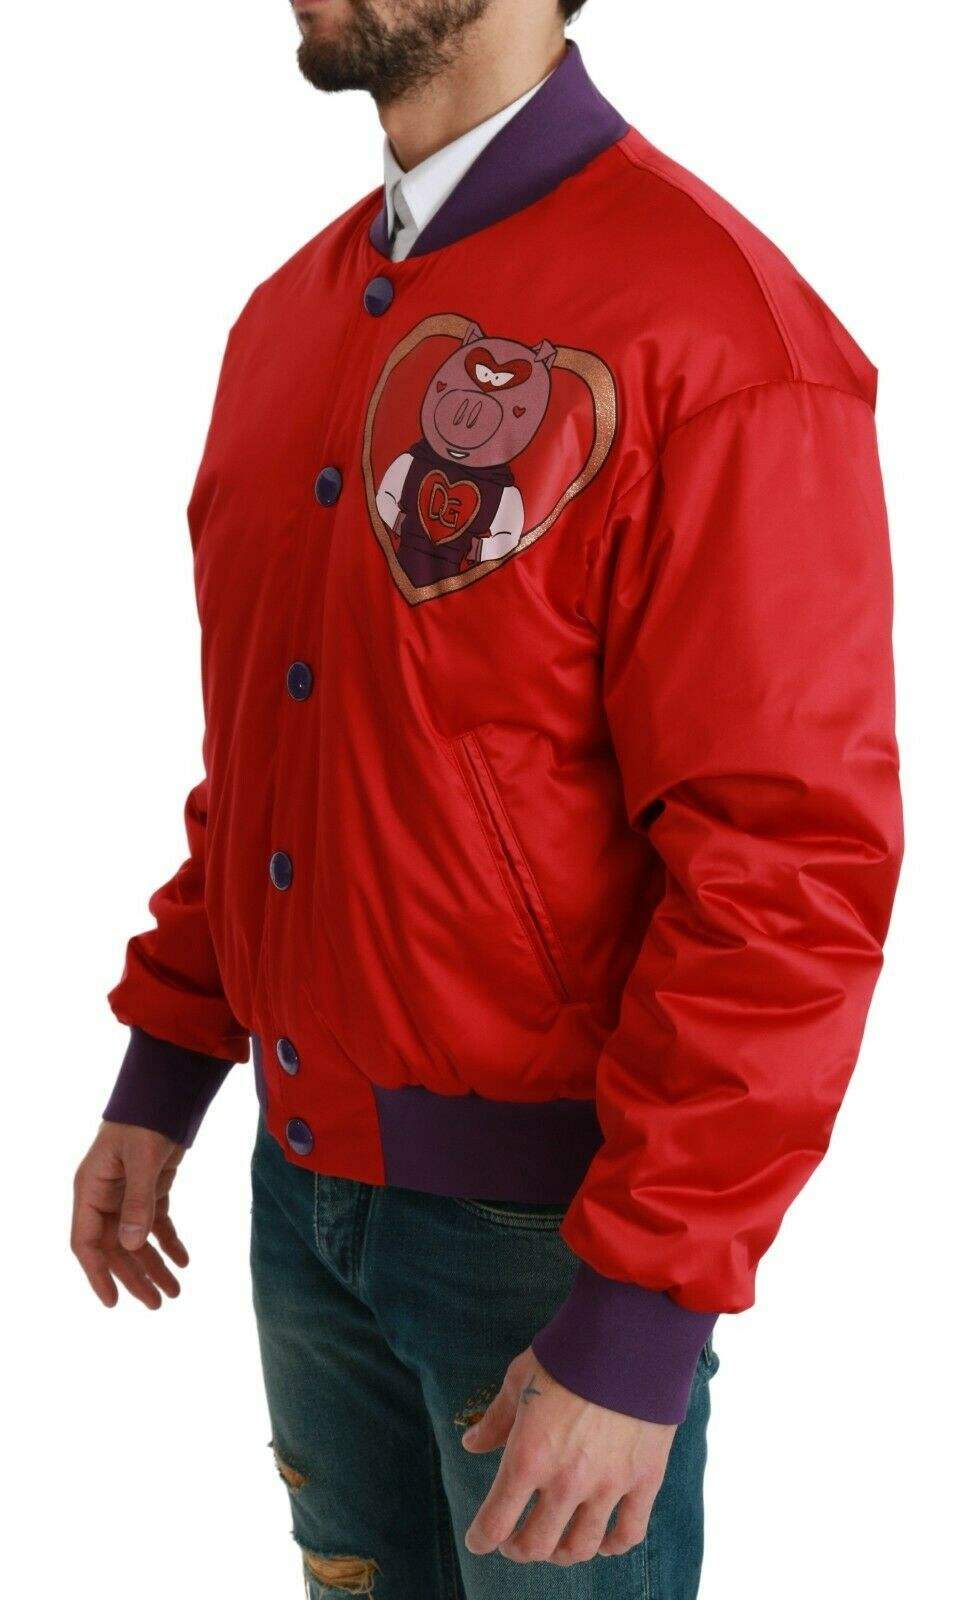 Dolce & Gabbana  Red YEAR OF THE PIG Bomber Jacket #men, Brand_Dolce & Gabbana, Catch, Dolce & Gabbana, feed-agegroup-adult, feed-color-red, feed-gender-male, feed-size-IT44 | XS, feed-size-IT46 | S, feed-size-IT48 | M, feed-size-IT50 | L, feed-size-IT52 | L, feed-size-IT58 | XXL, feed-size-IT60 | 3XL, Gender_Men, IT44 | XS, IT46 | S, IT48 | M, IT50 | L, IT52 | L, IT54 | XL, IT56 | XL, IT58 | XXL, IT60 | 3XL, Jackets - Men - Clothing, Kogan, Men - New Arrivals, Red at SEYMAYKA